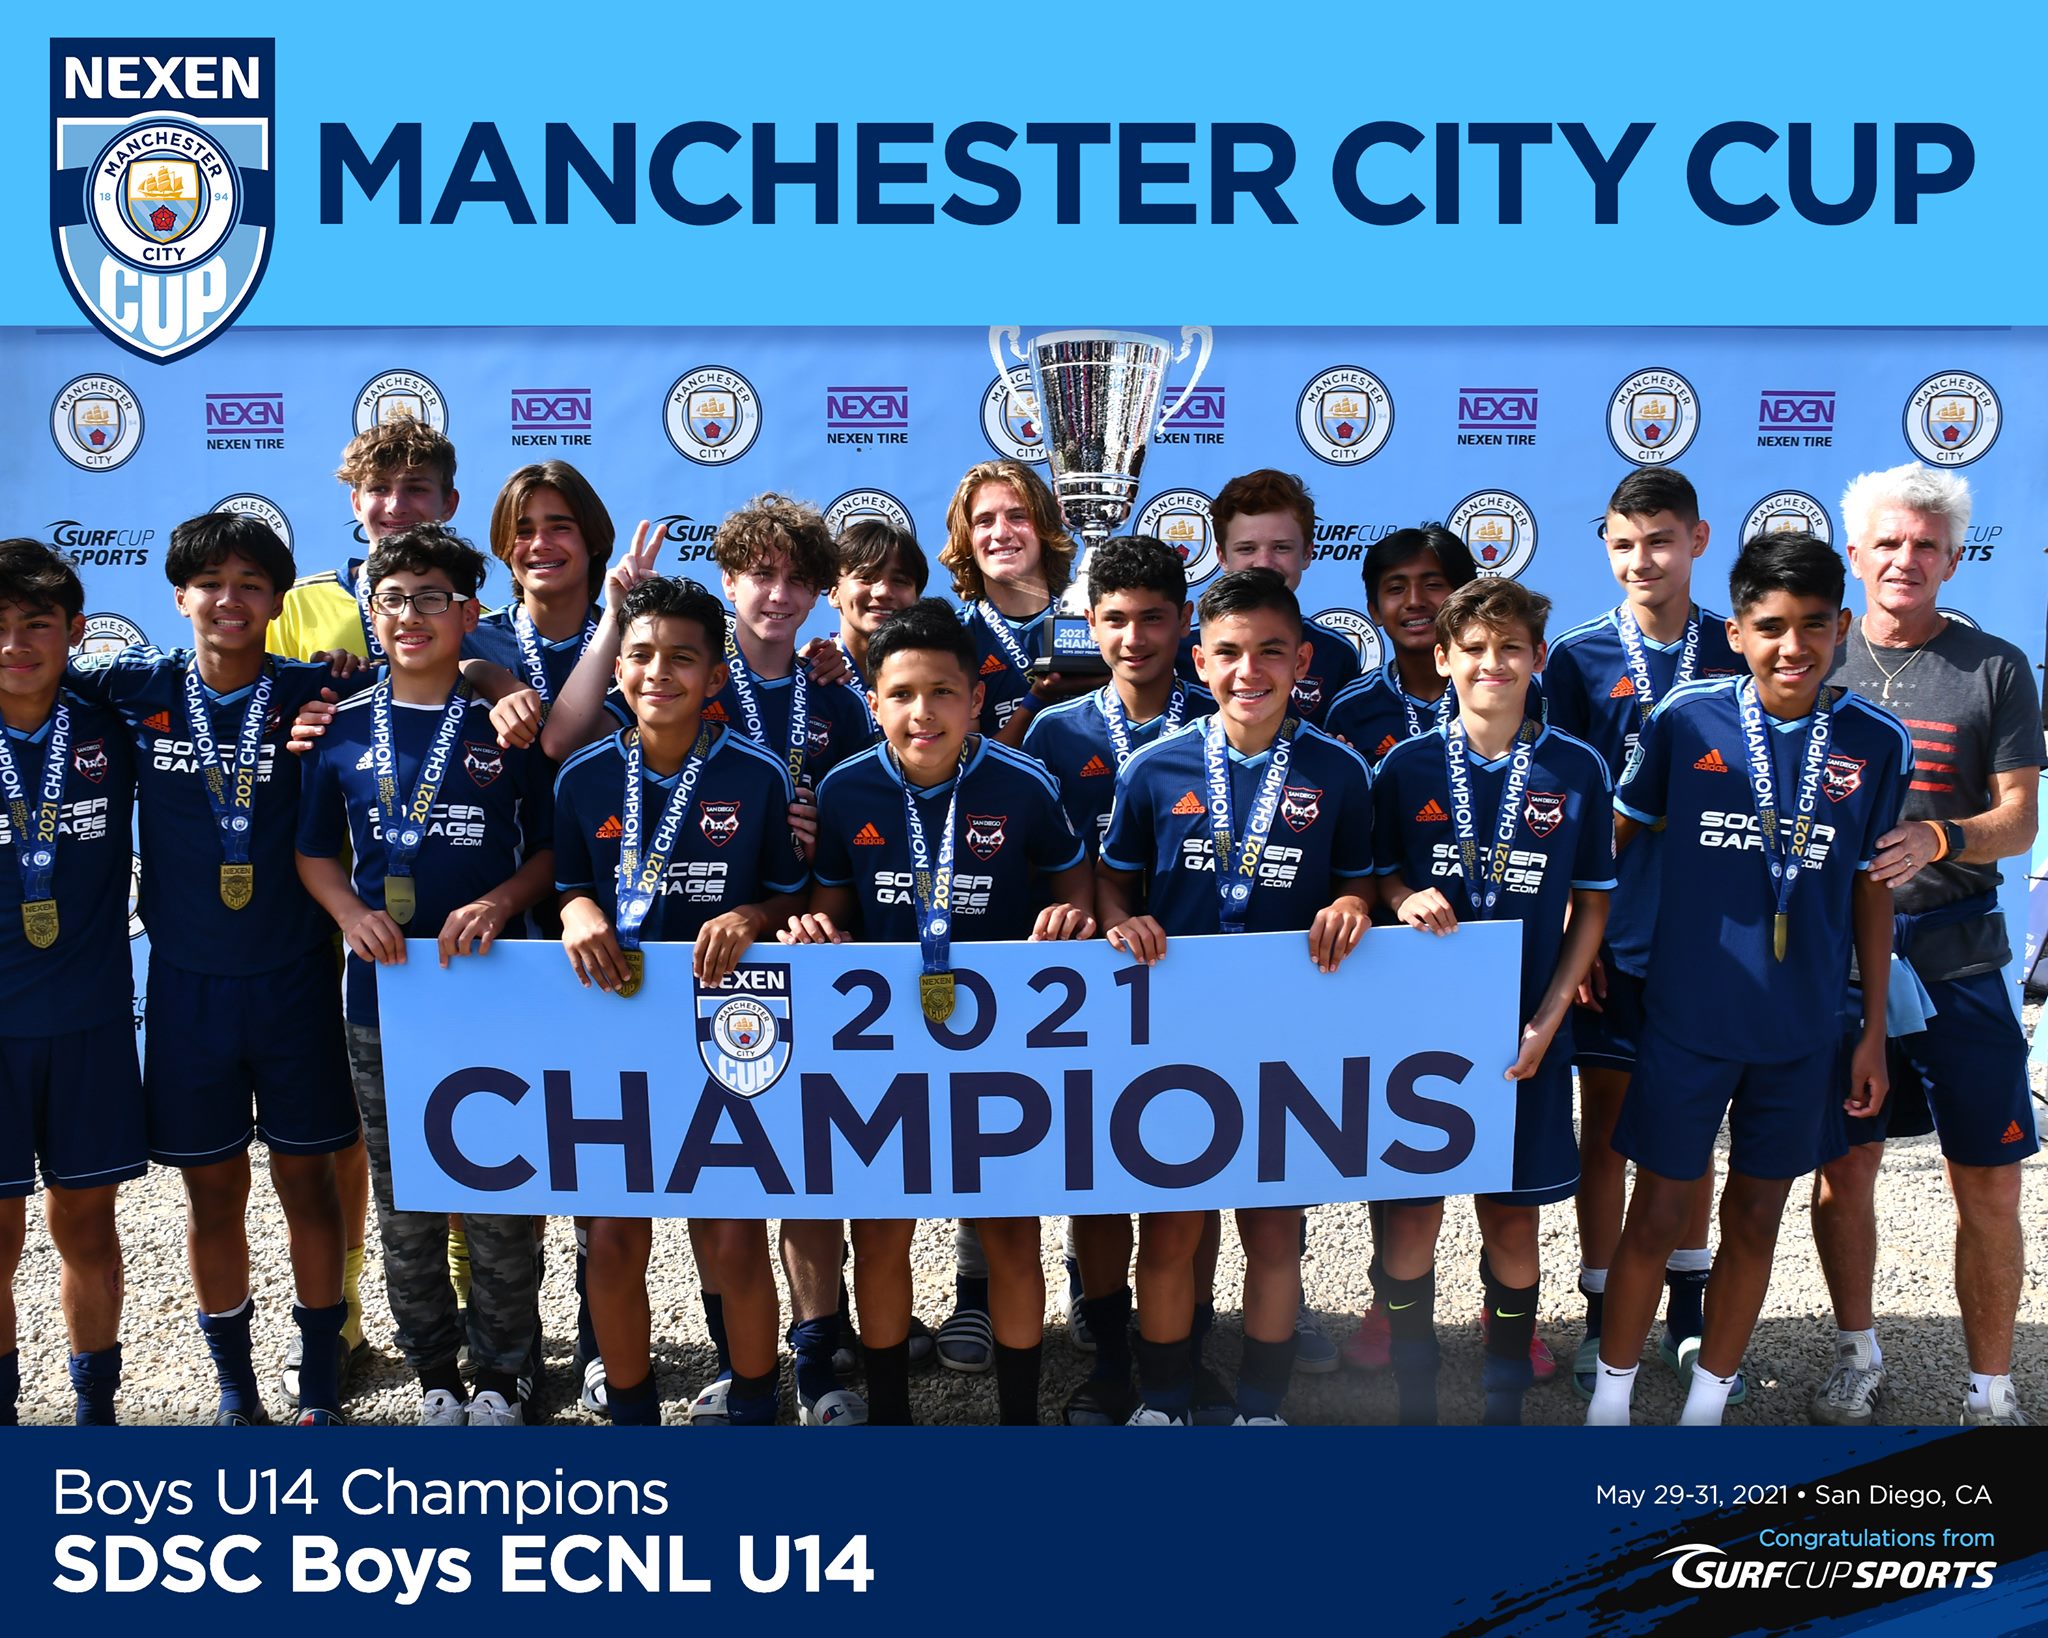 YOUTH SOCCER NEWS 2021 MANCHESTER CITY CUP CHAMPIONS • SoccerToday